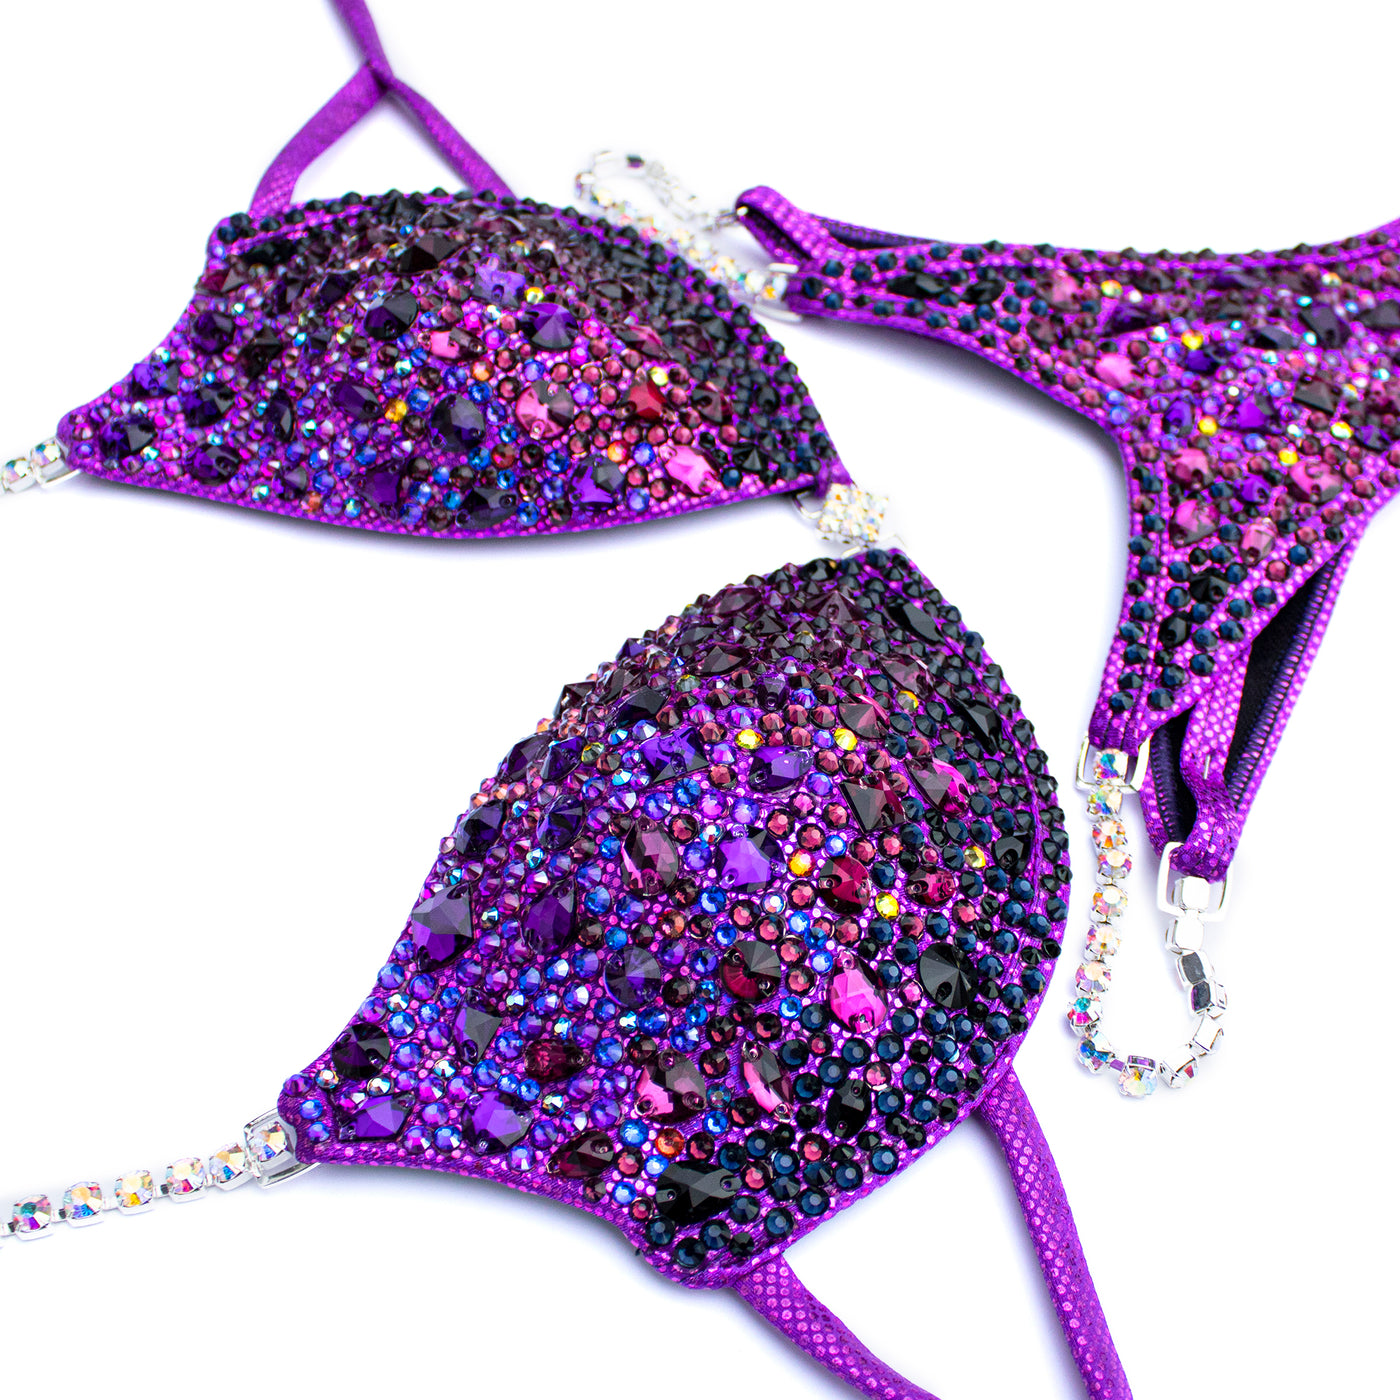 Glimmering Amethyst Wellness Competition Suit S/S | OMG Bikinis Rentals